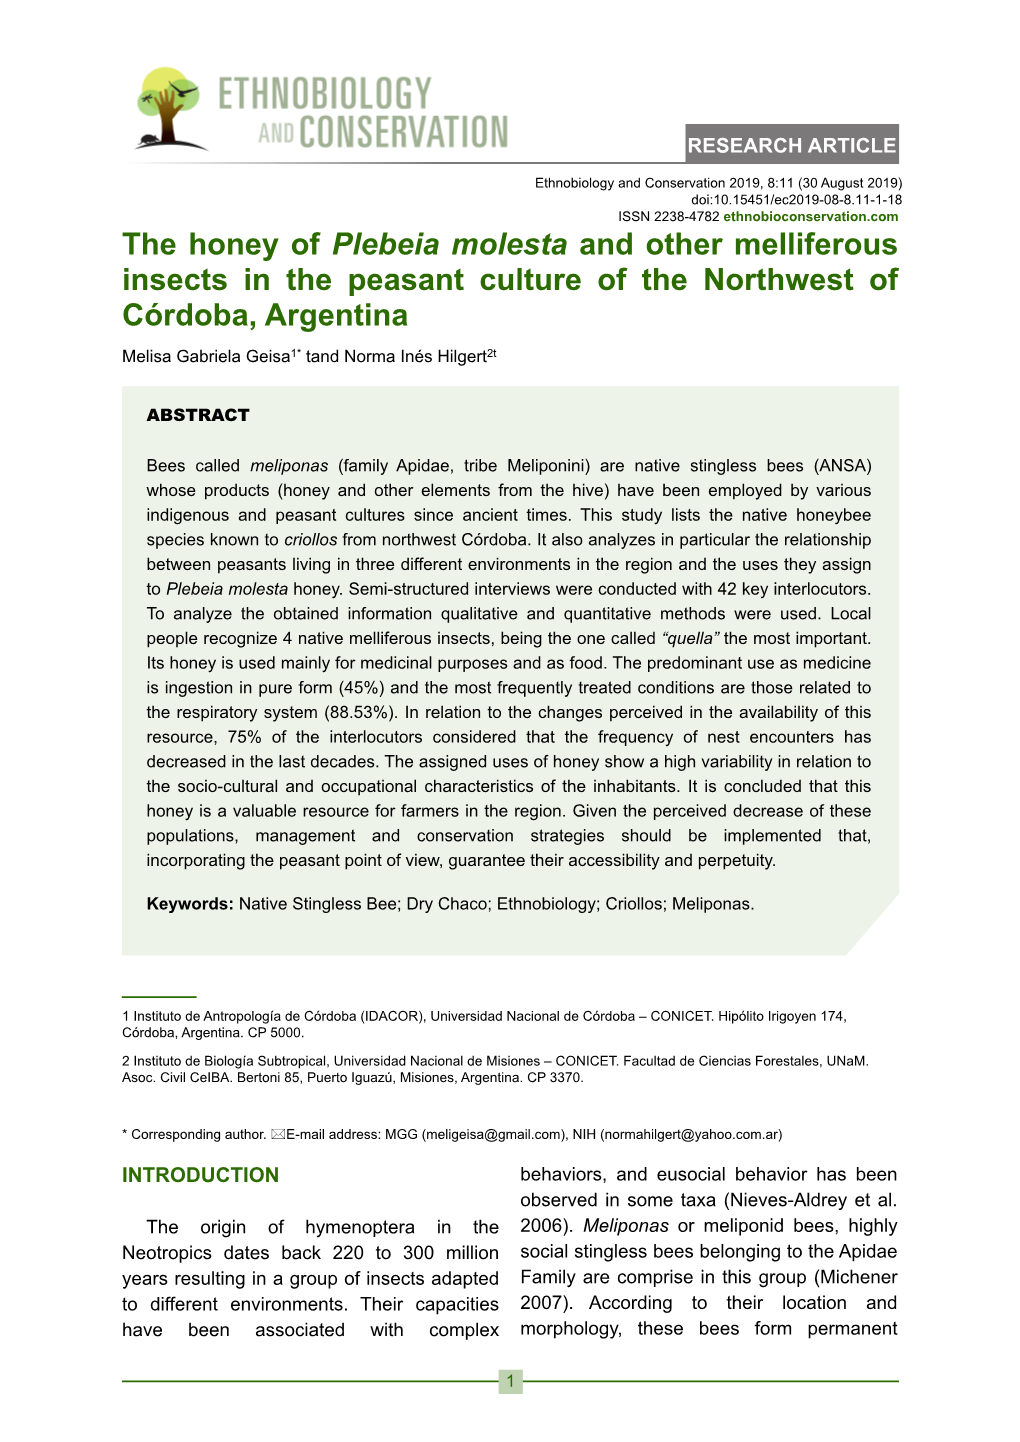 The Honey of Plebeia Molesta and Other Melliferous Insects in The